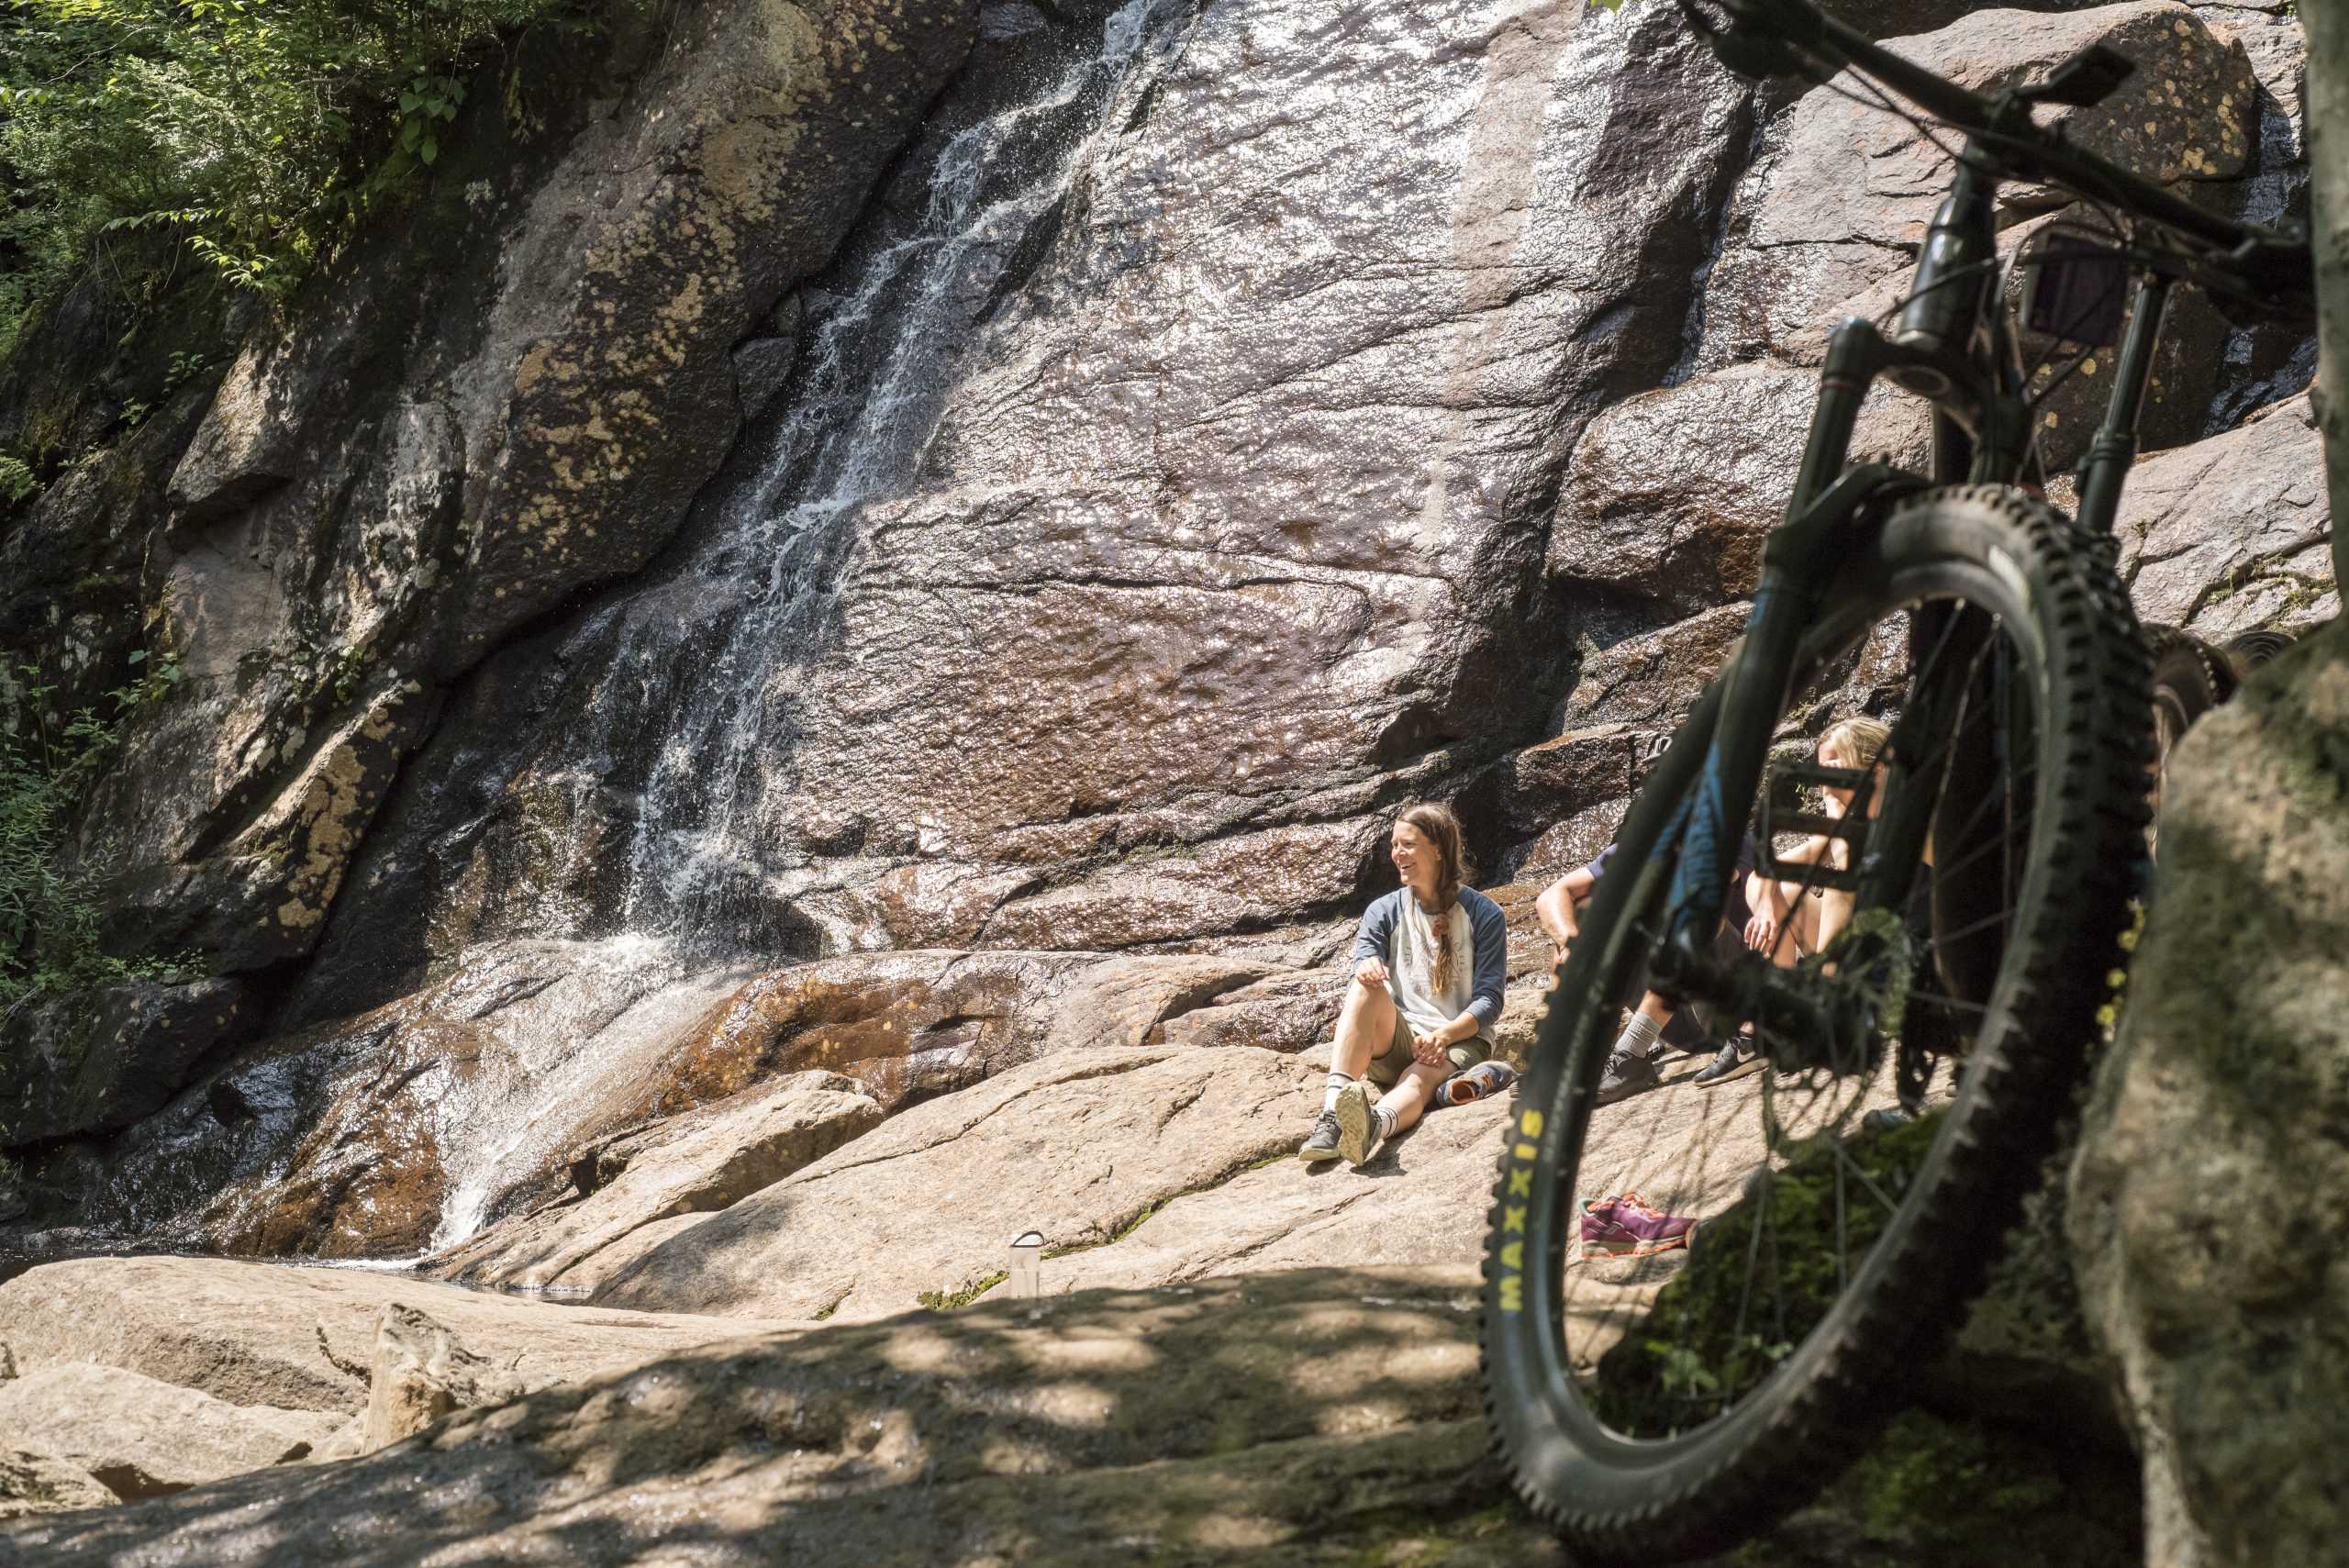 Two cyclists taking a break at the foot of Chute à Gilles, with their mountain bikes in the foreground.